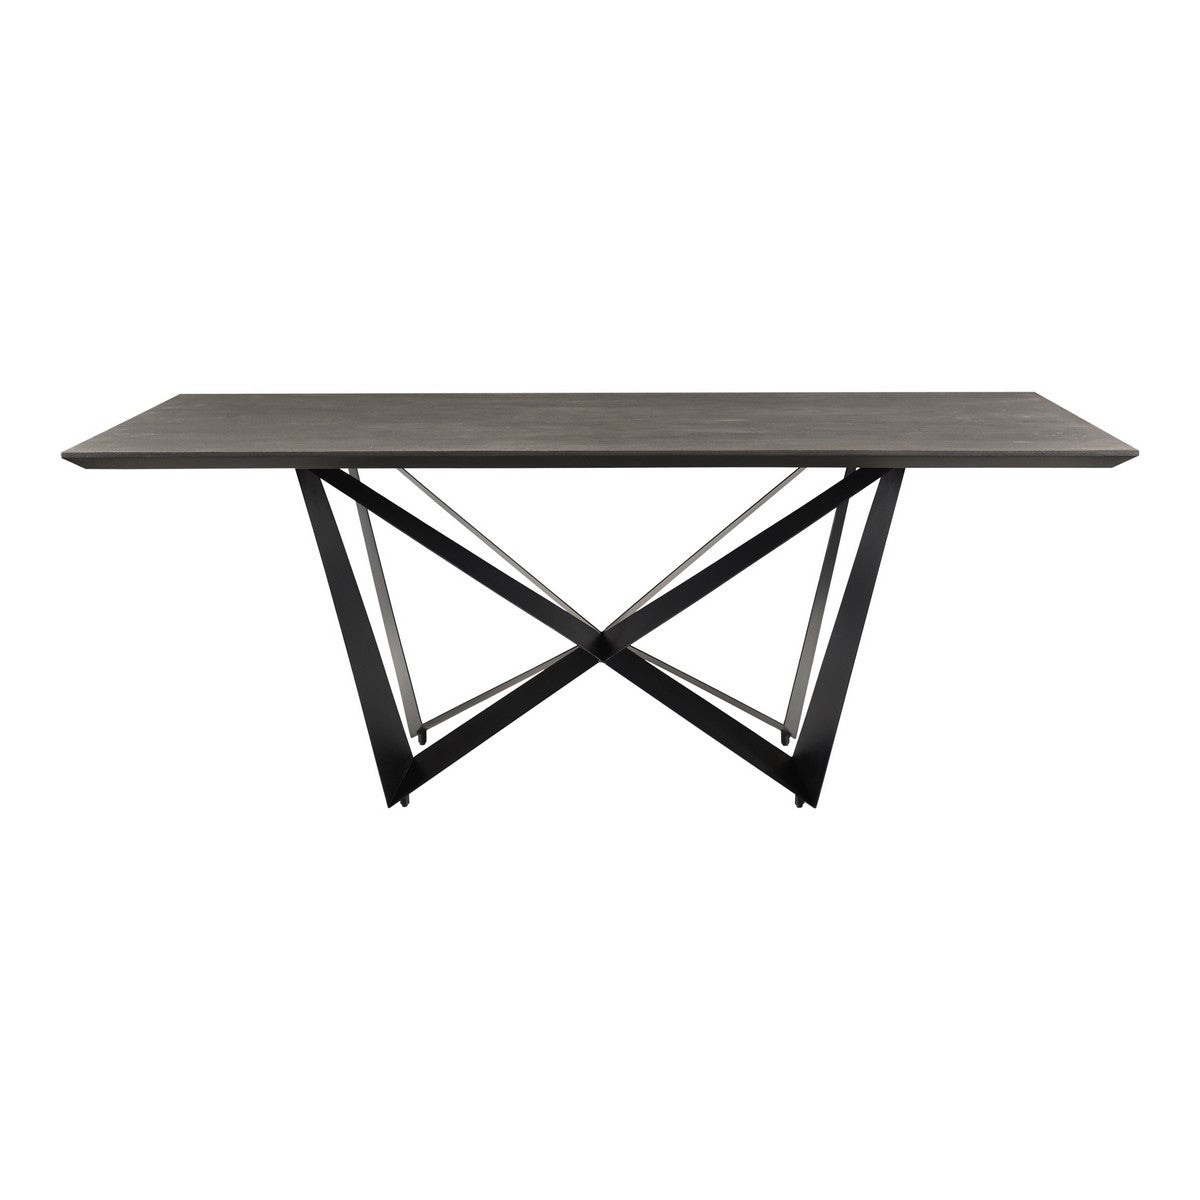 Moe's Home Collection Brolio Dining Table Charcoal - RP-1007-07 - Moe's Home Collection - Dining Tables - Minimal And Modern - 1